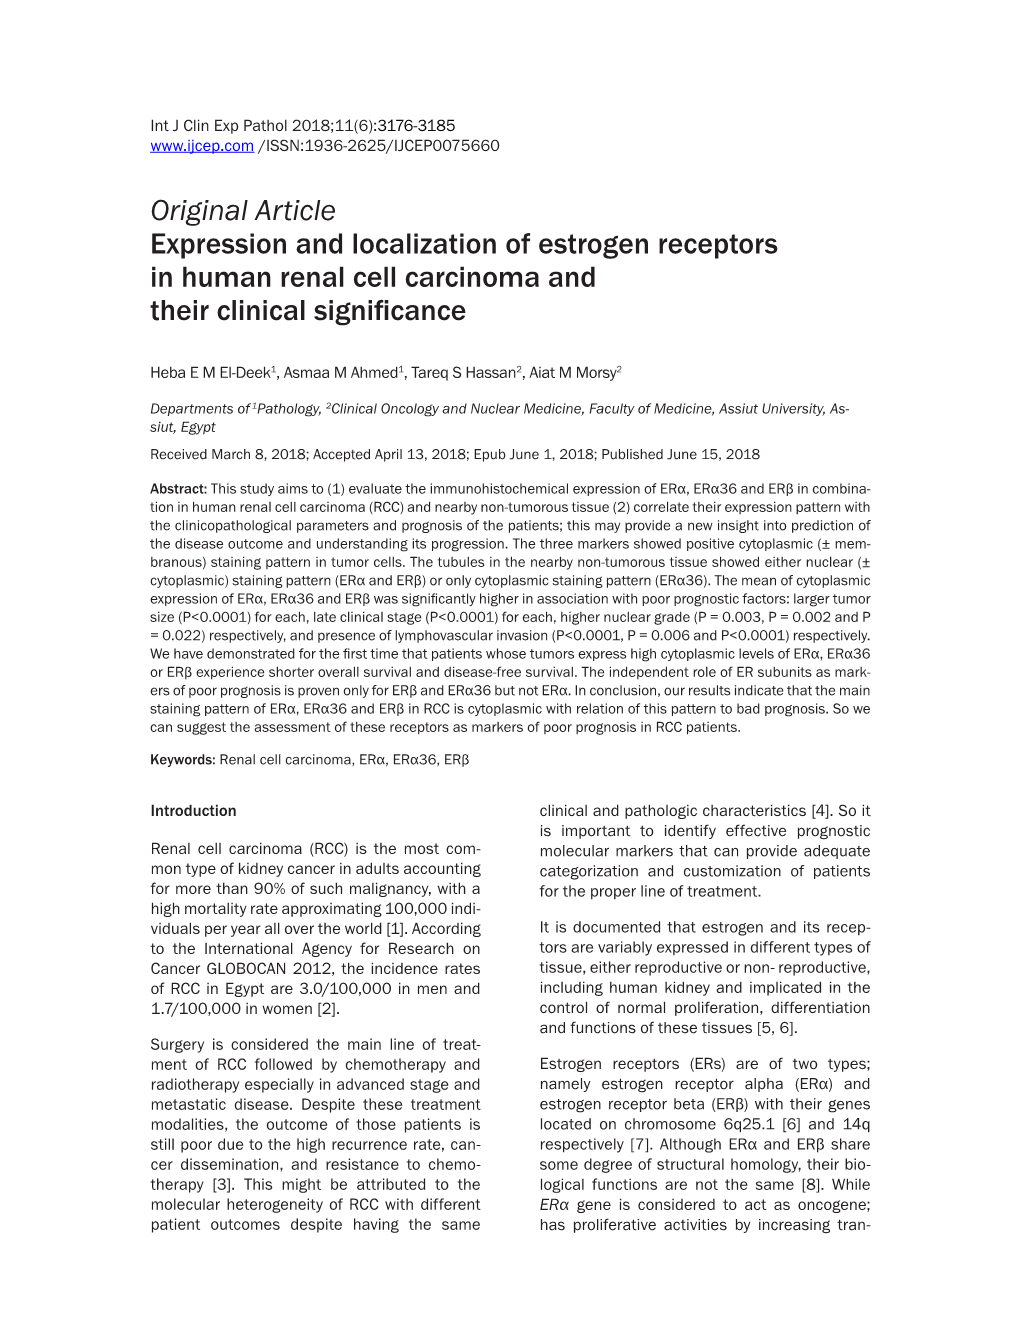 Original Article Expression and Localization of Estrogen Receptors in Human Renal Cell Carcinoma and Their Clinical Significance